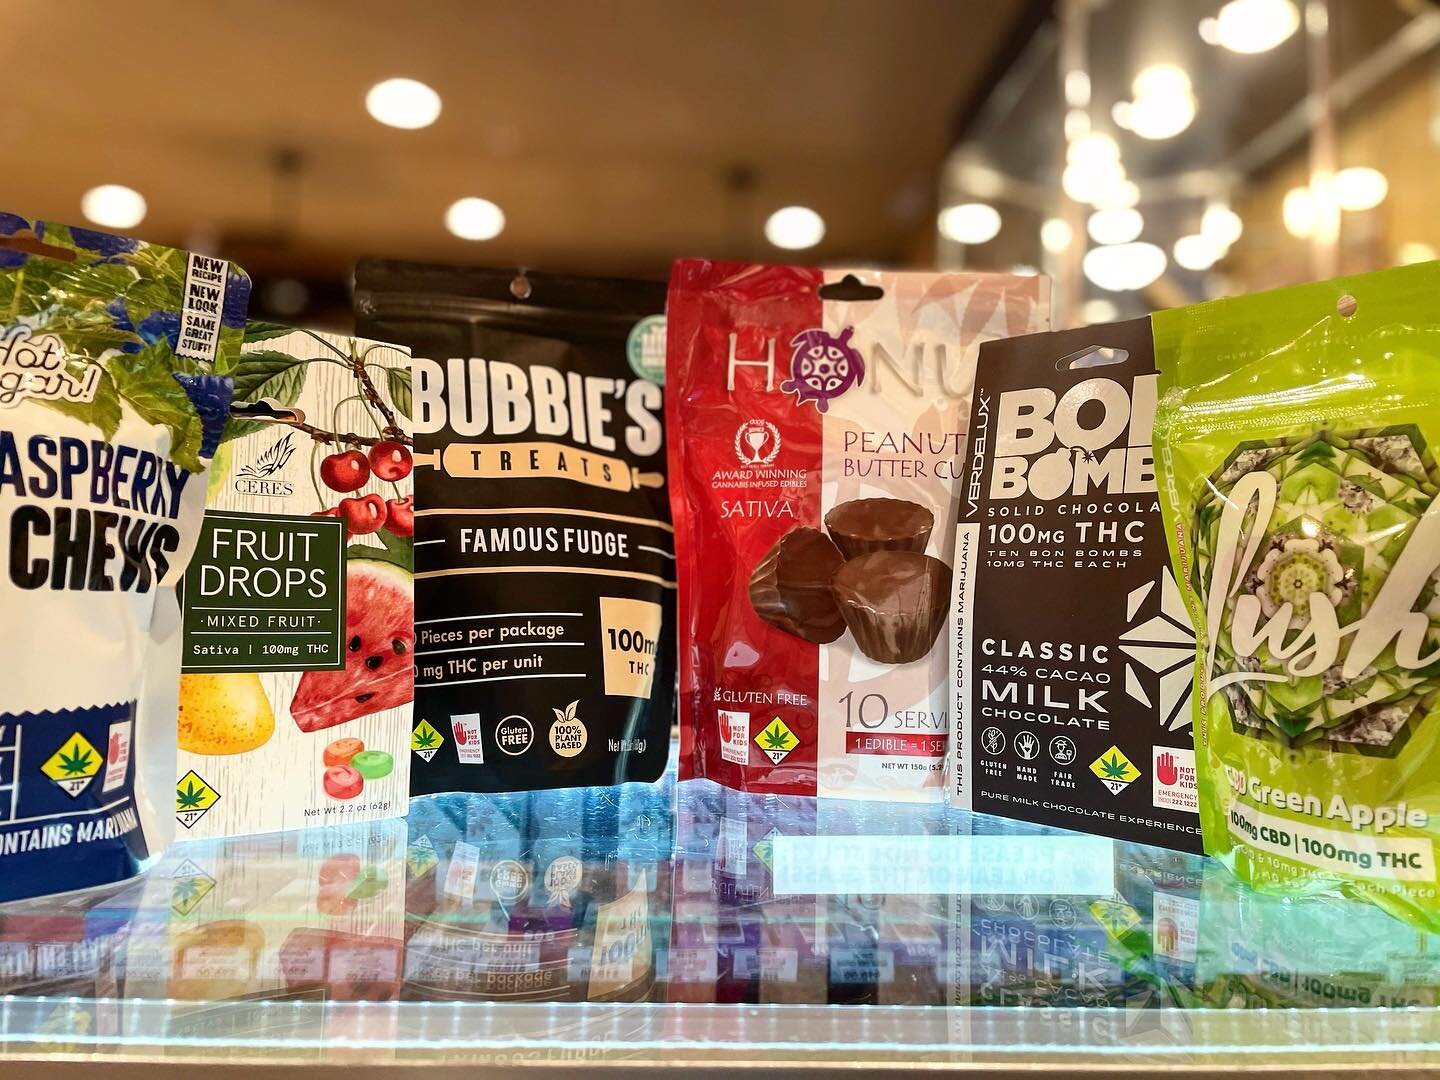 Happy #MunchieMonday peeps! Come grab a bite and say high to your favorite bud tenders 💚 
&bull;
&bull;
&bull;
 #420#i502 #budtenderlife #munchiemonday #i502retail #washington #weedlife

❌WARNING: This product has intoxicating effects and may be hab